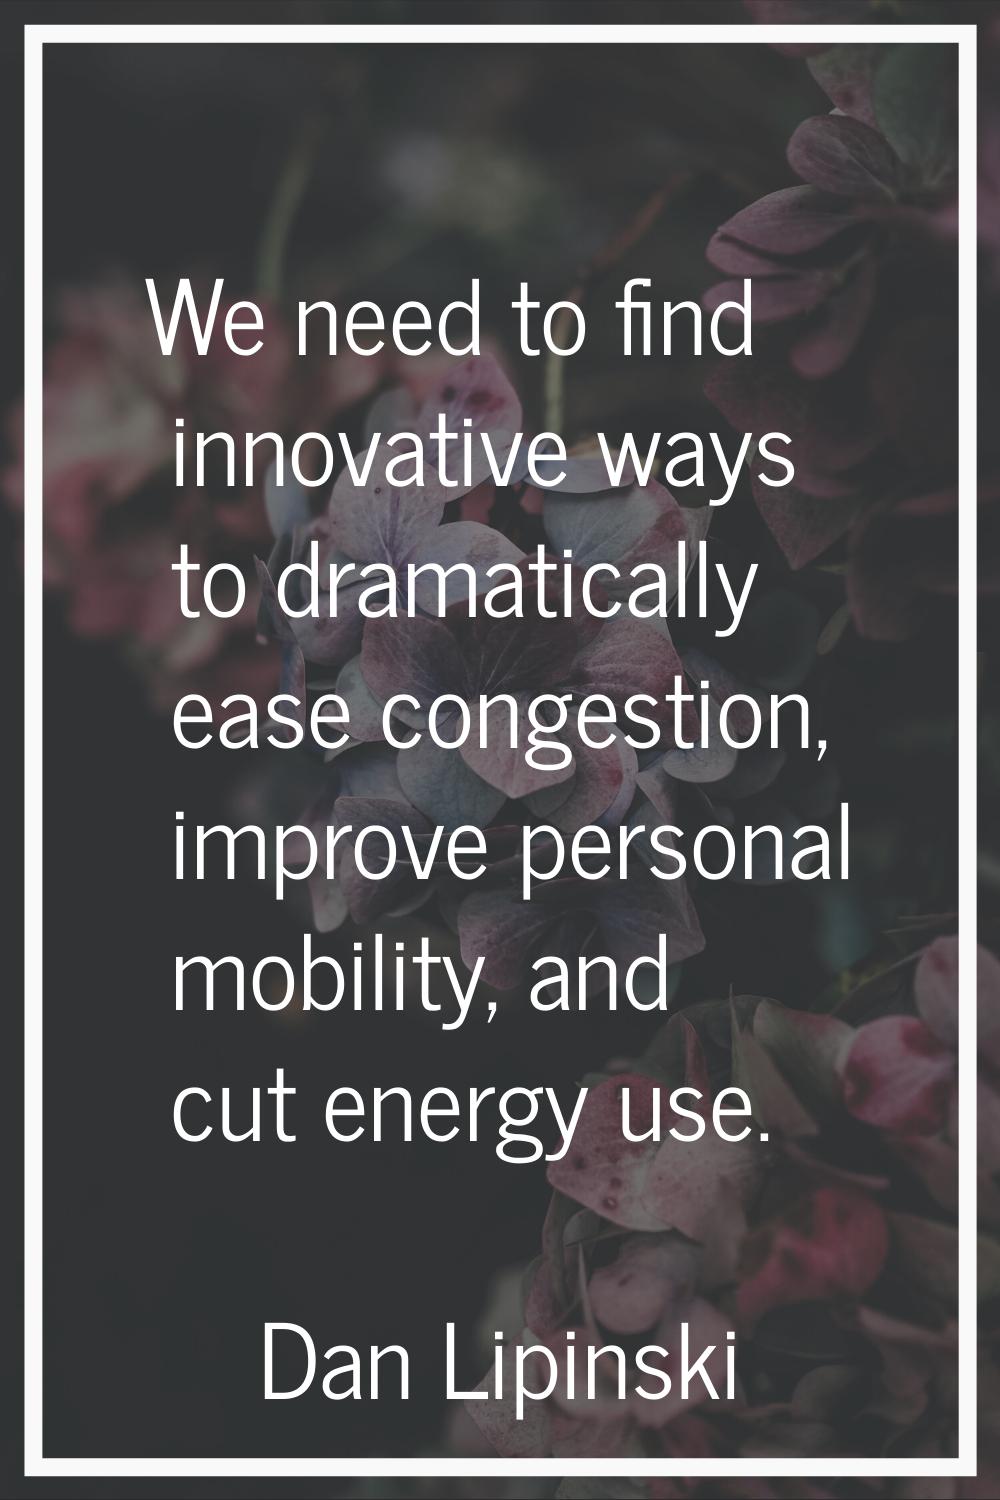 We need to find innovative ways to dramatically ease congestion, improve personal mobility, and cut